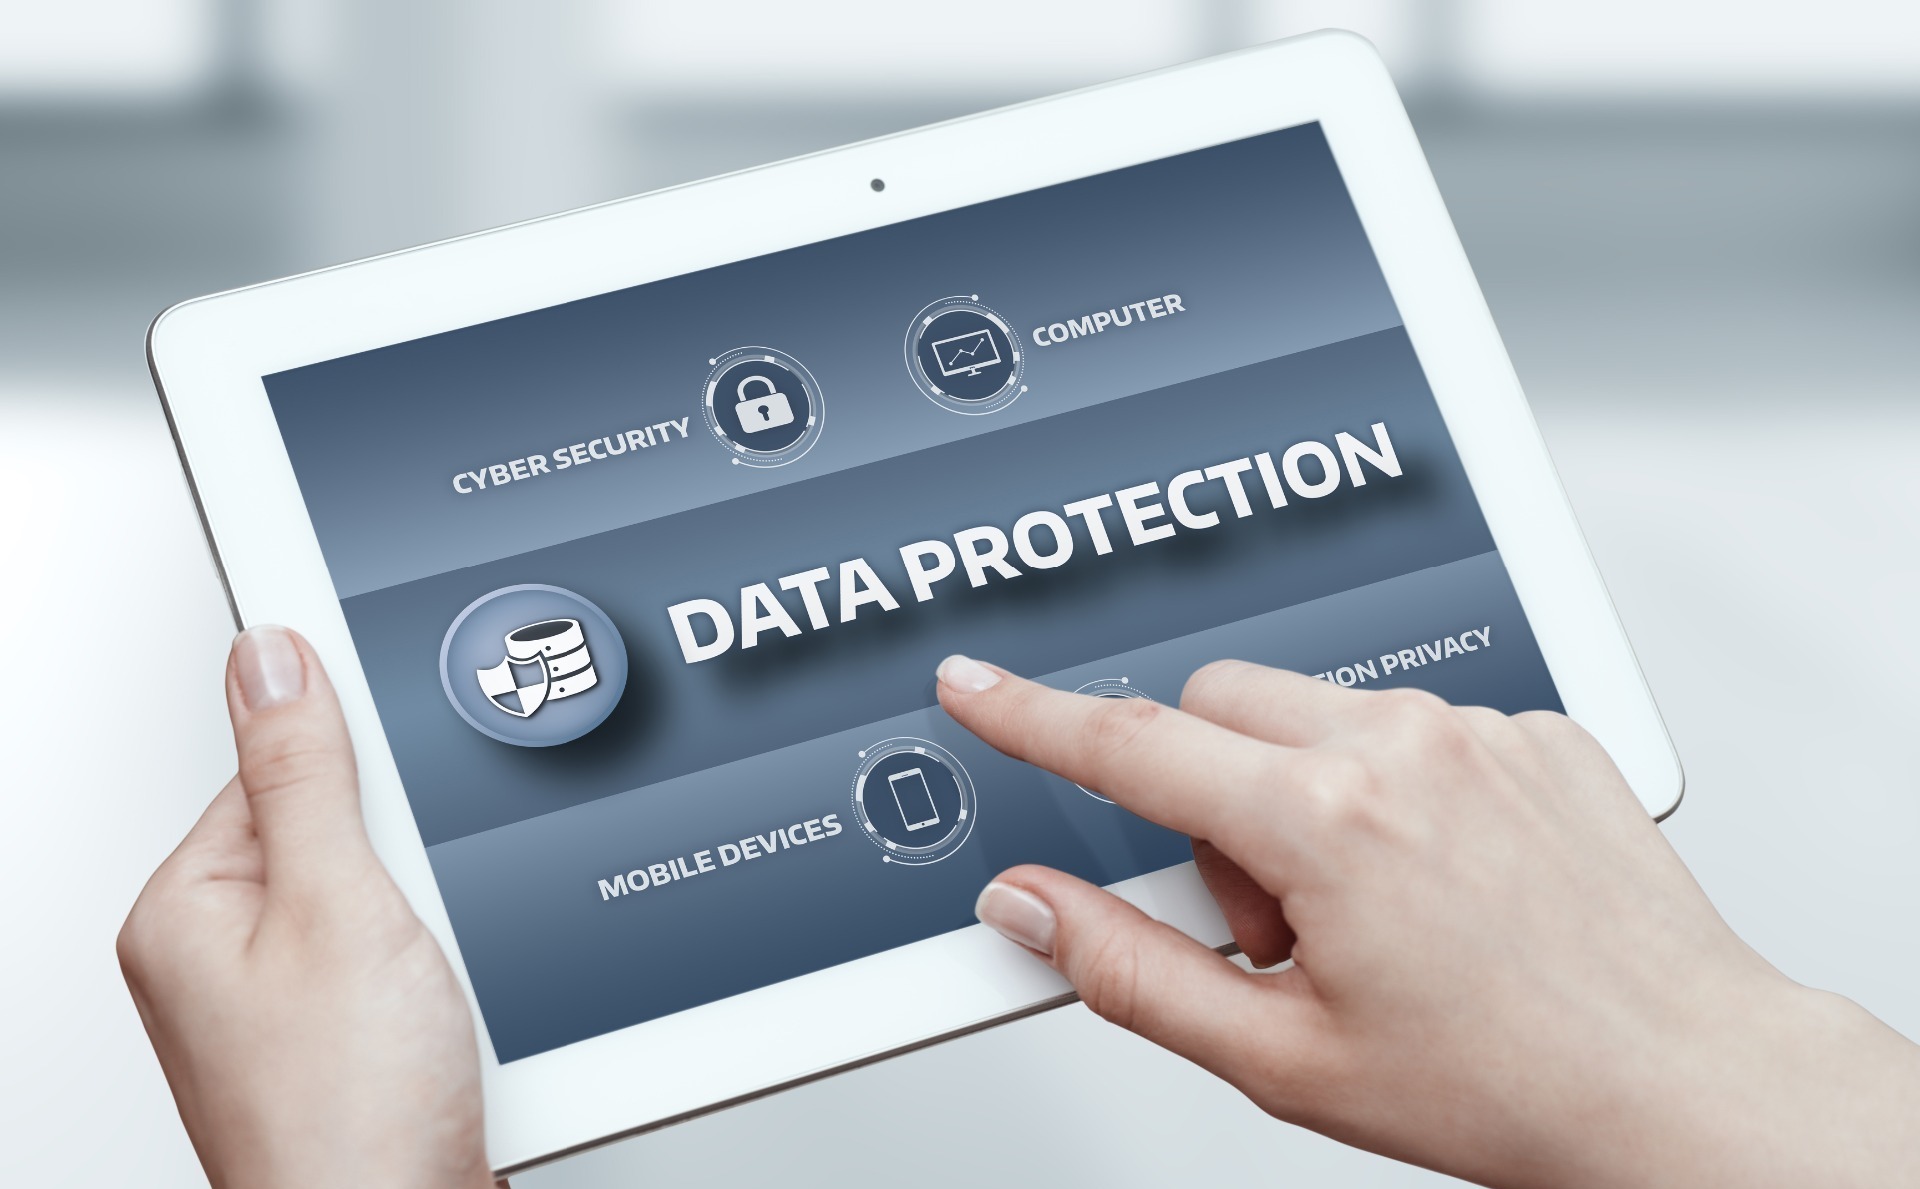 Client Data Protection